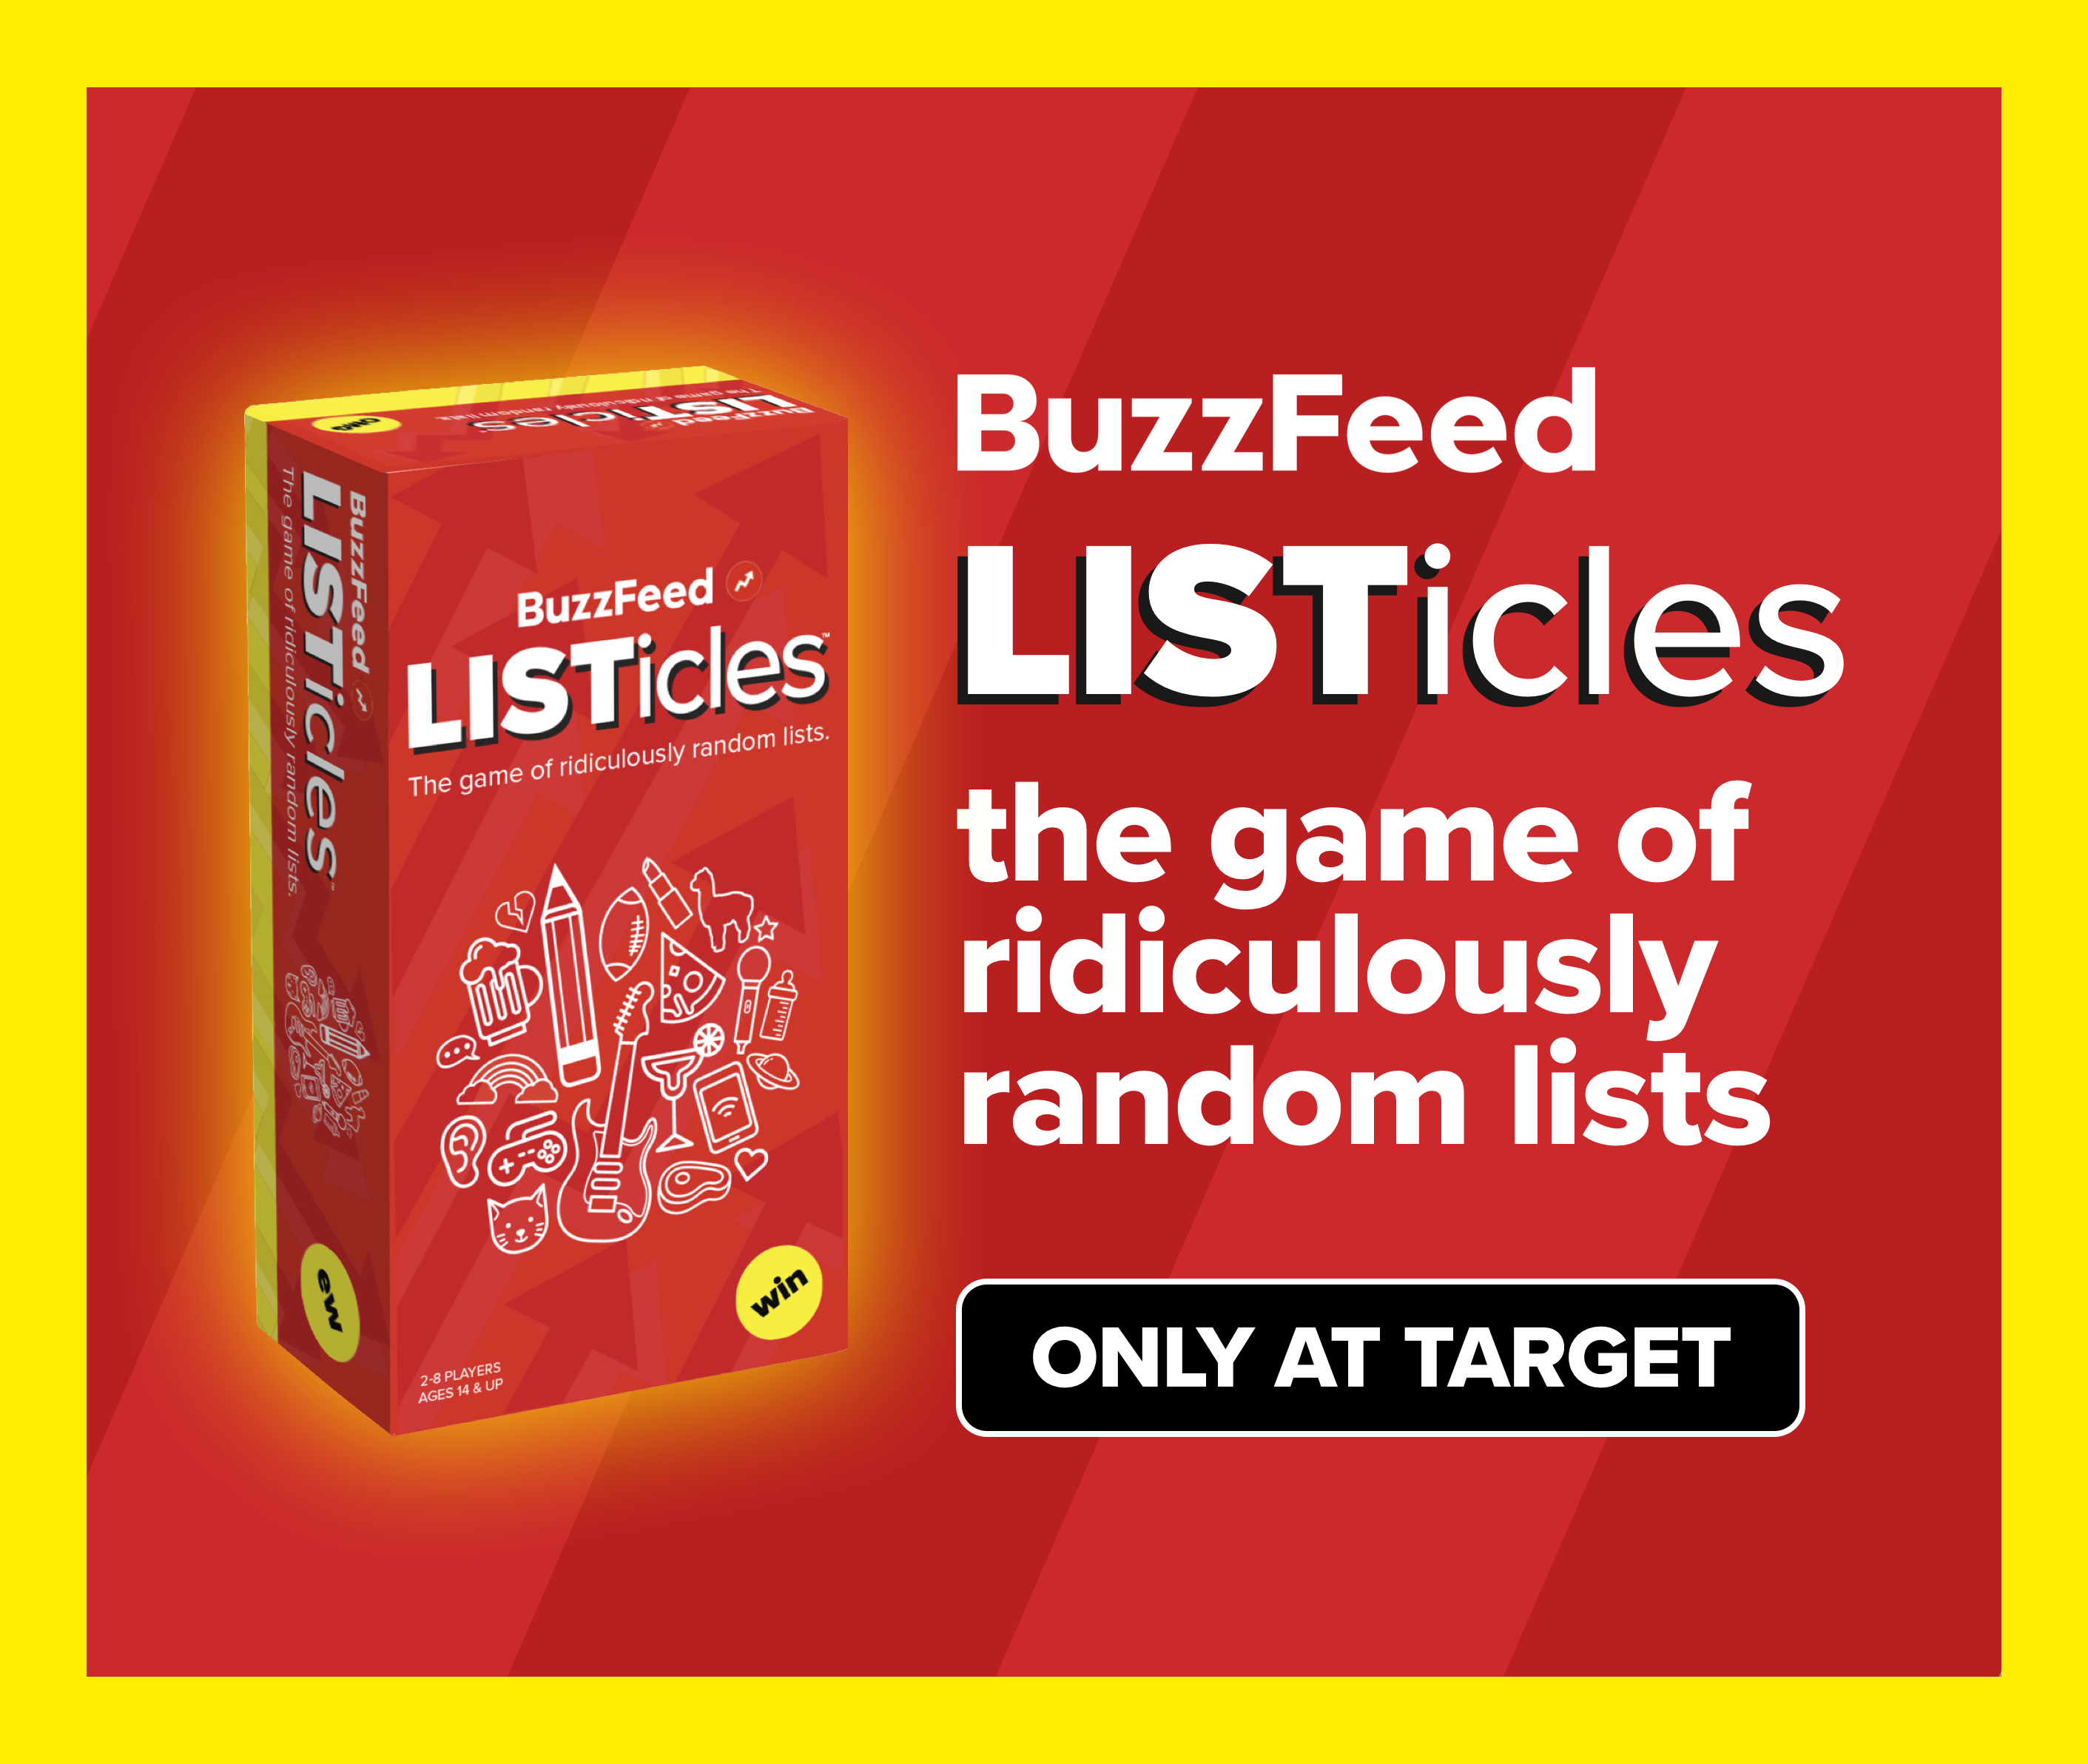 BuzzFeed has a new game out now at Target called Listicles